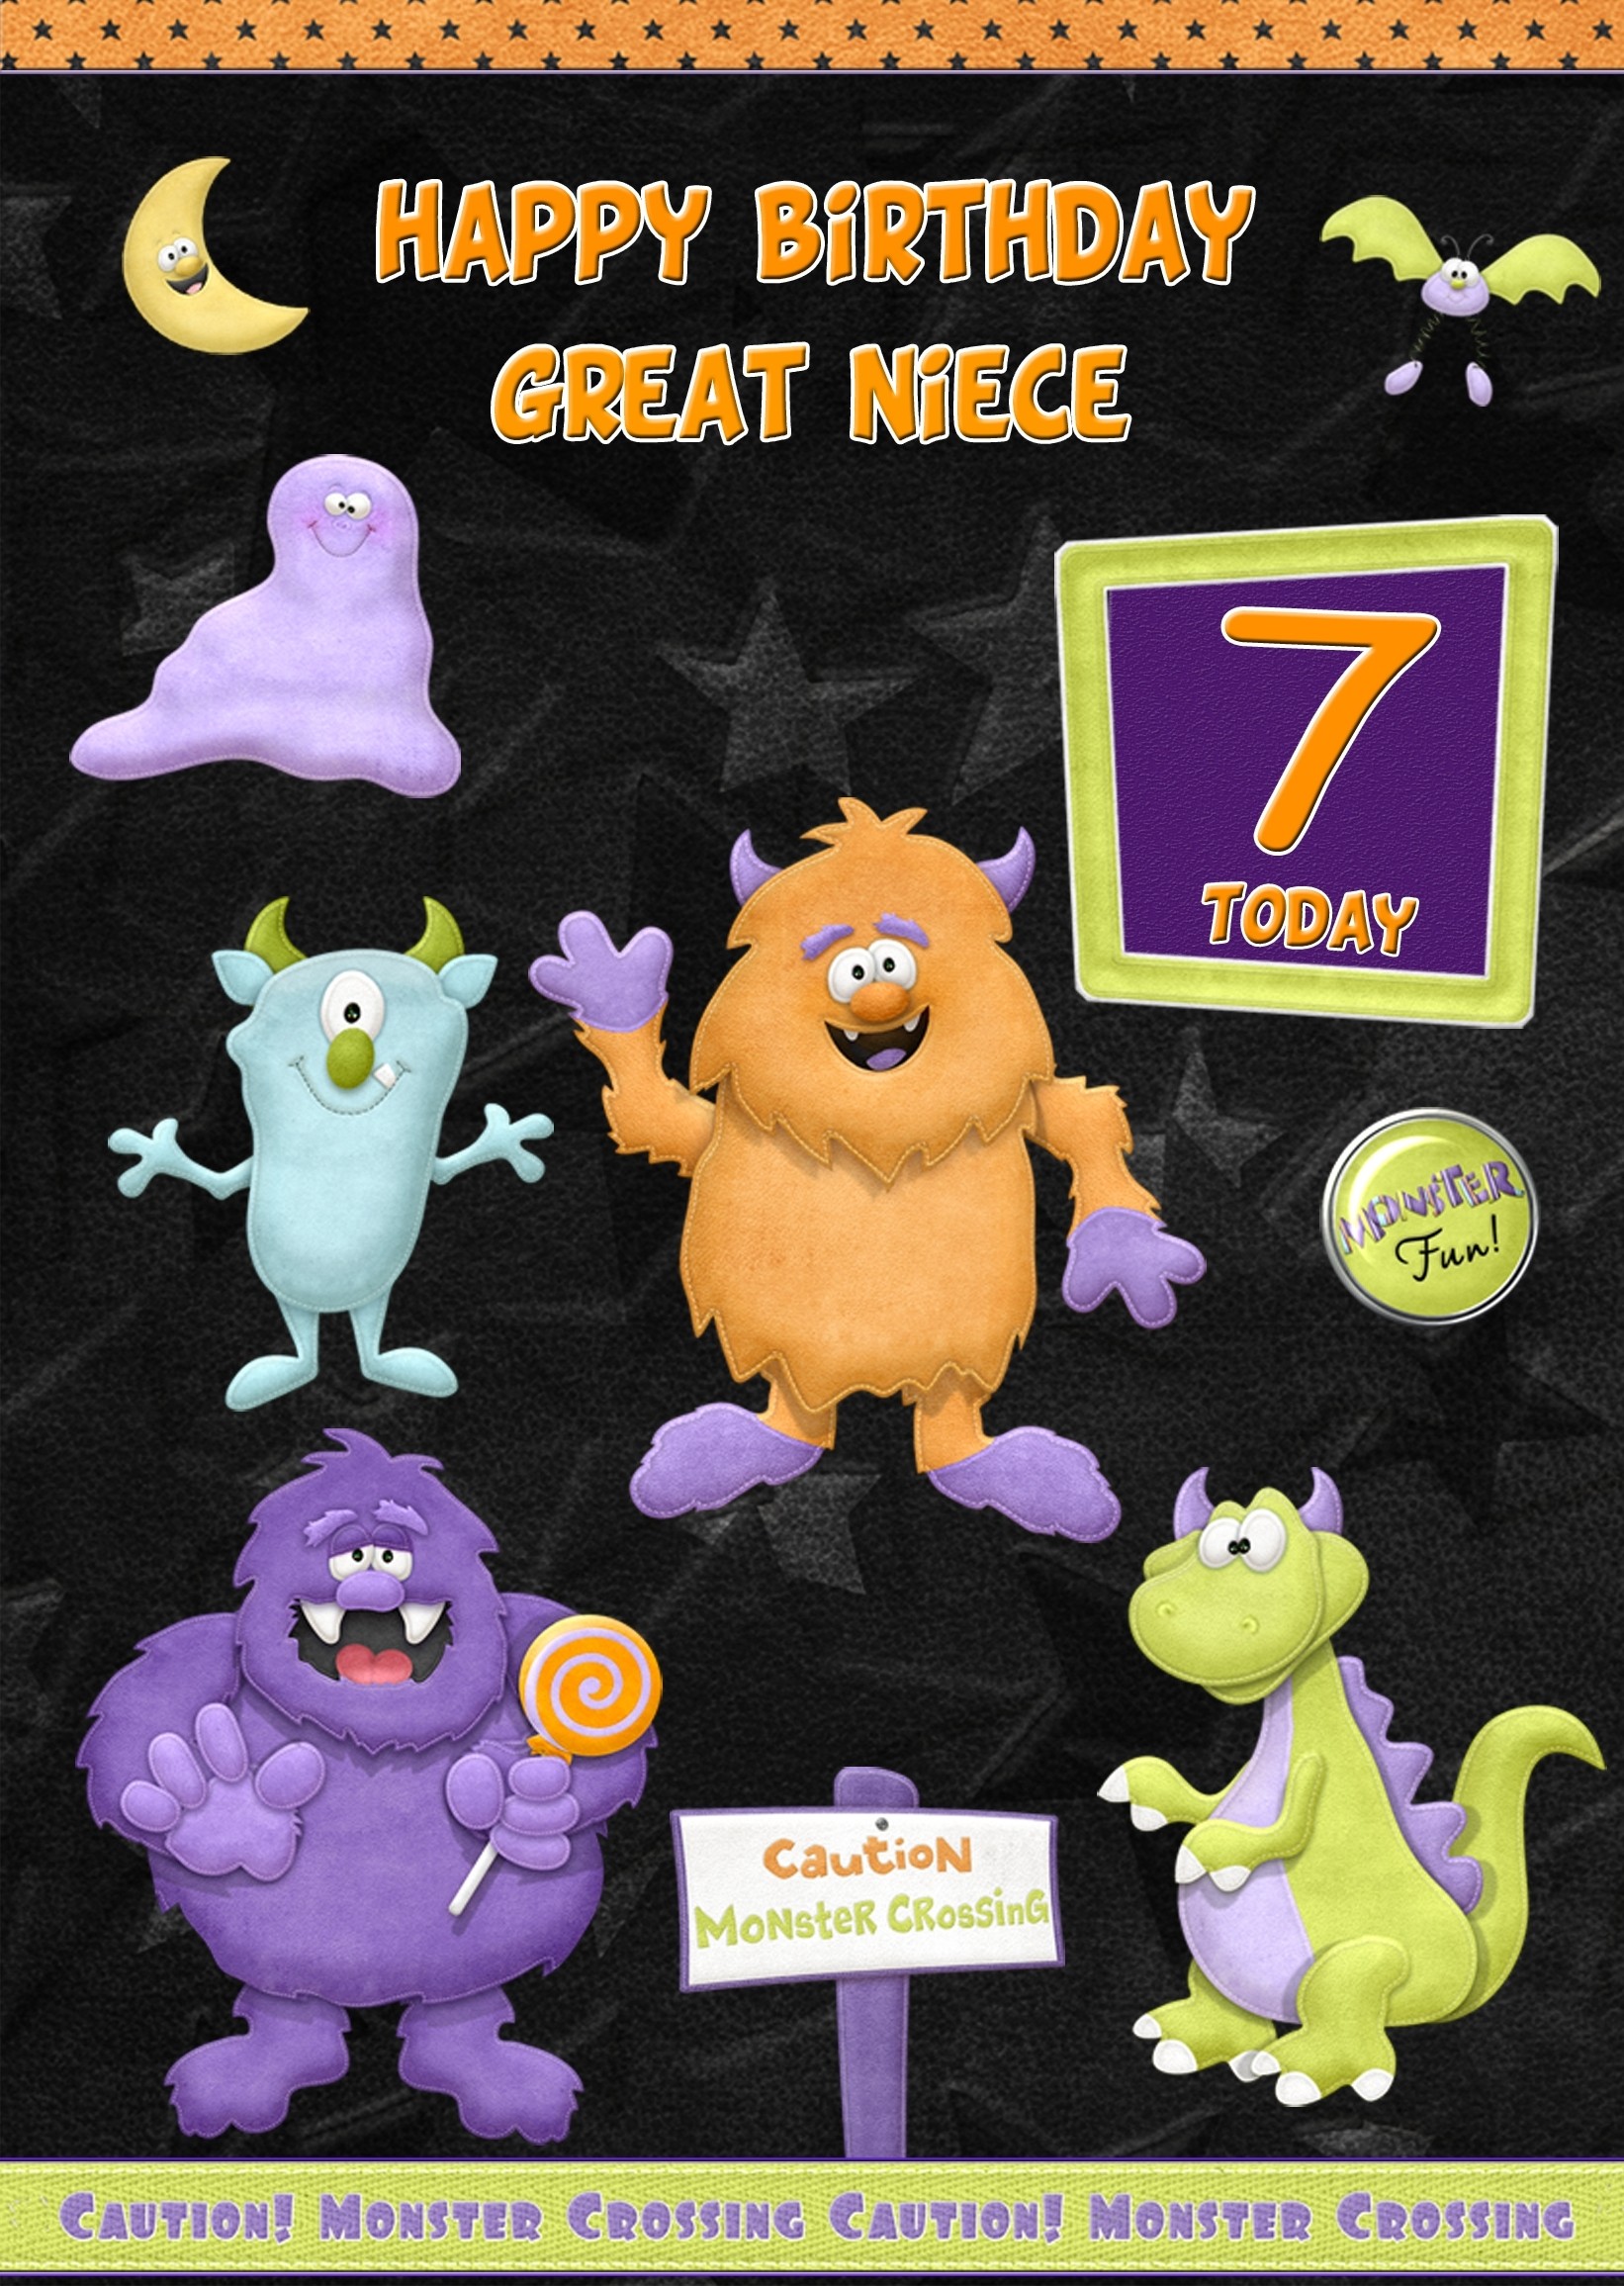 Kids 7th Birthday Funny Monster Cartoon Card for Great Niece